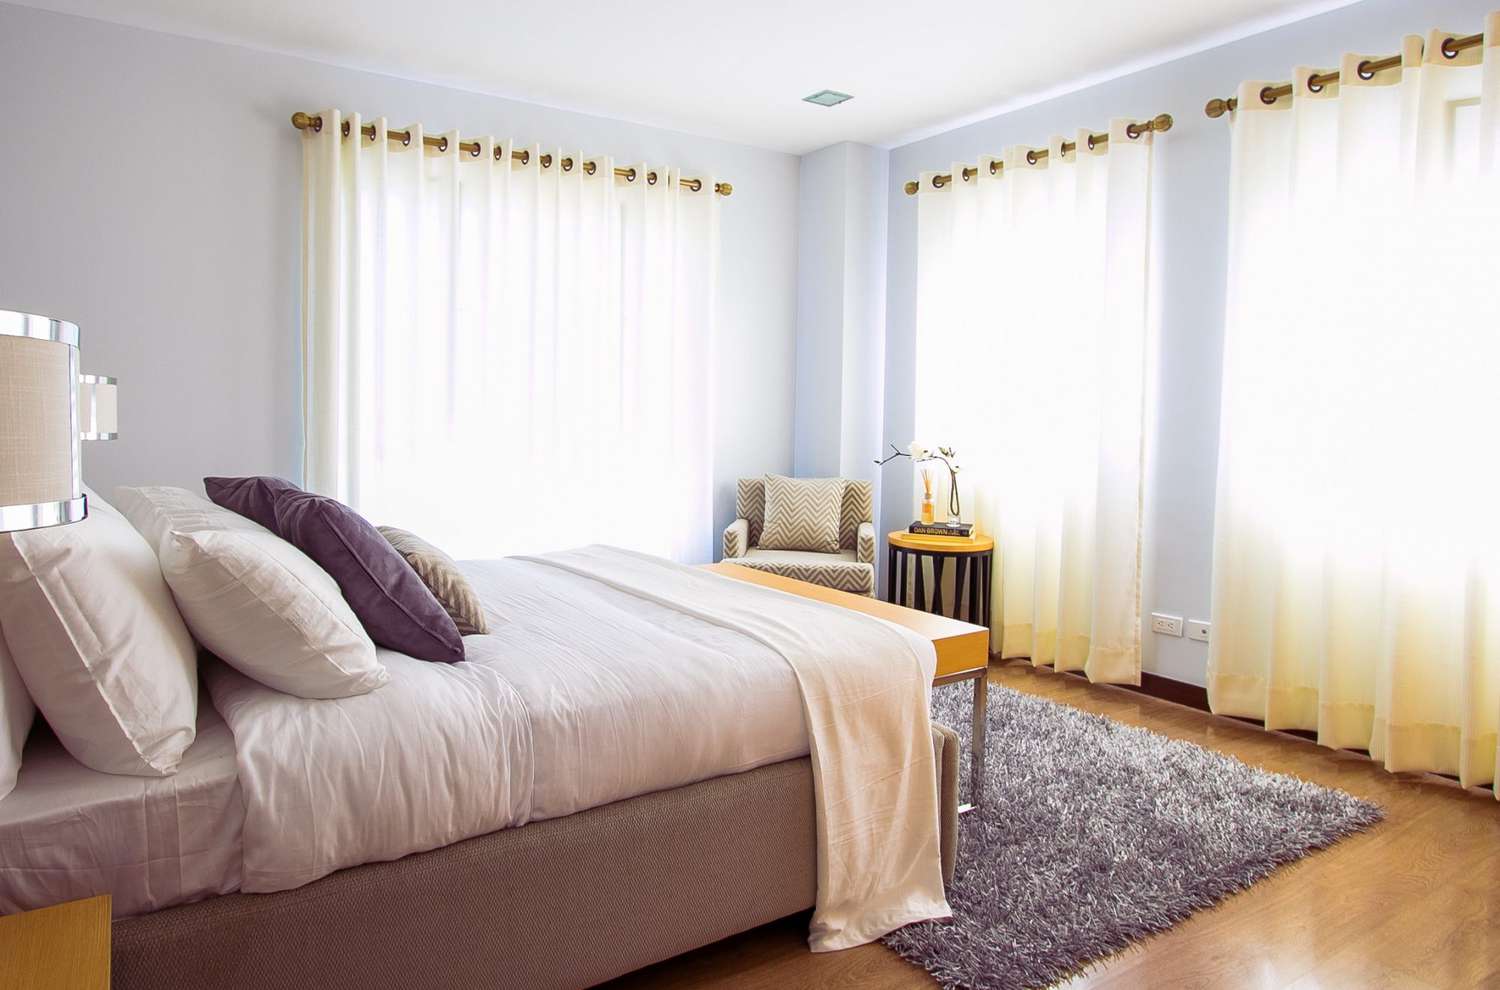 Guide To Curtains And Window Treatments Real Simple,Cheap King Size Bedroom Sets Near Me